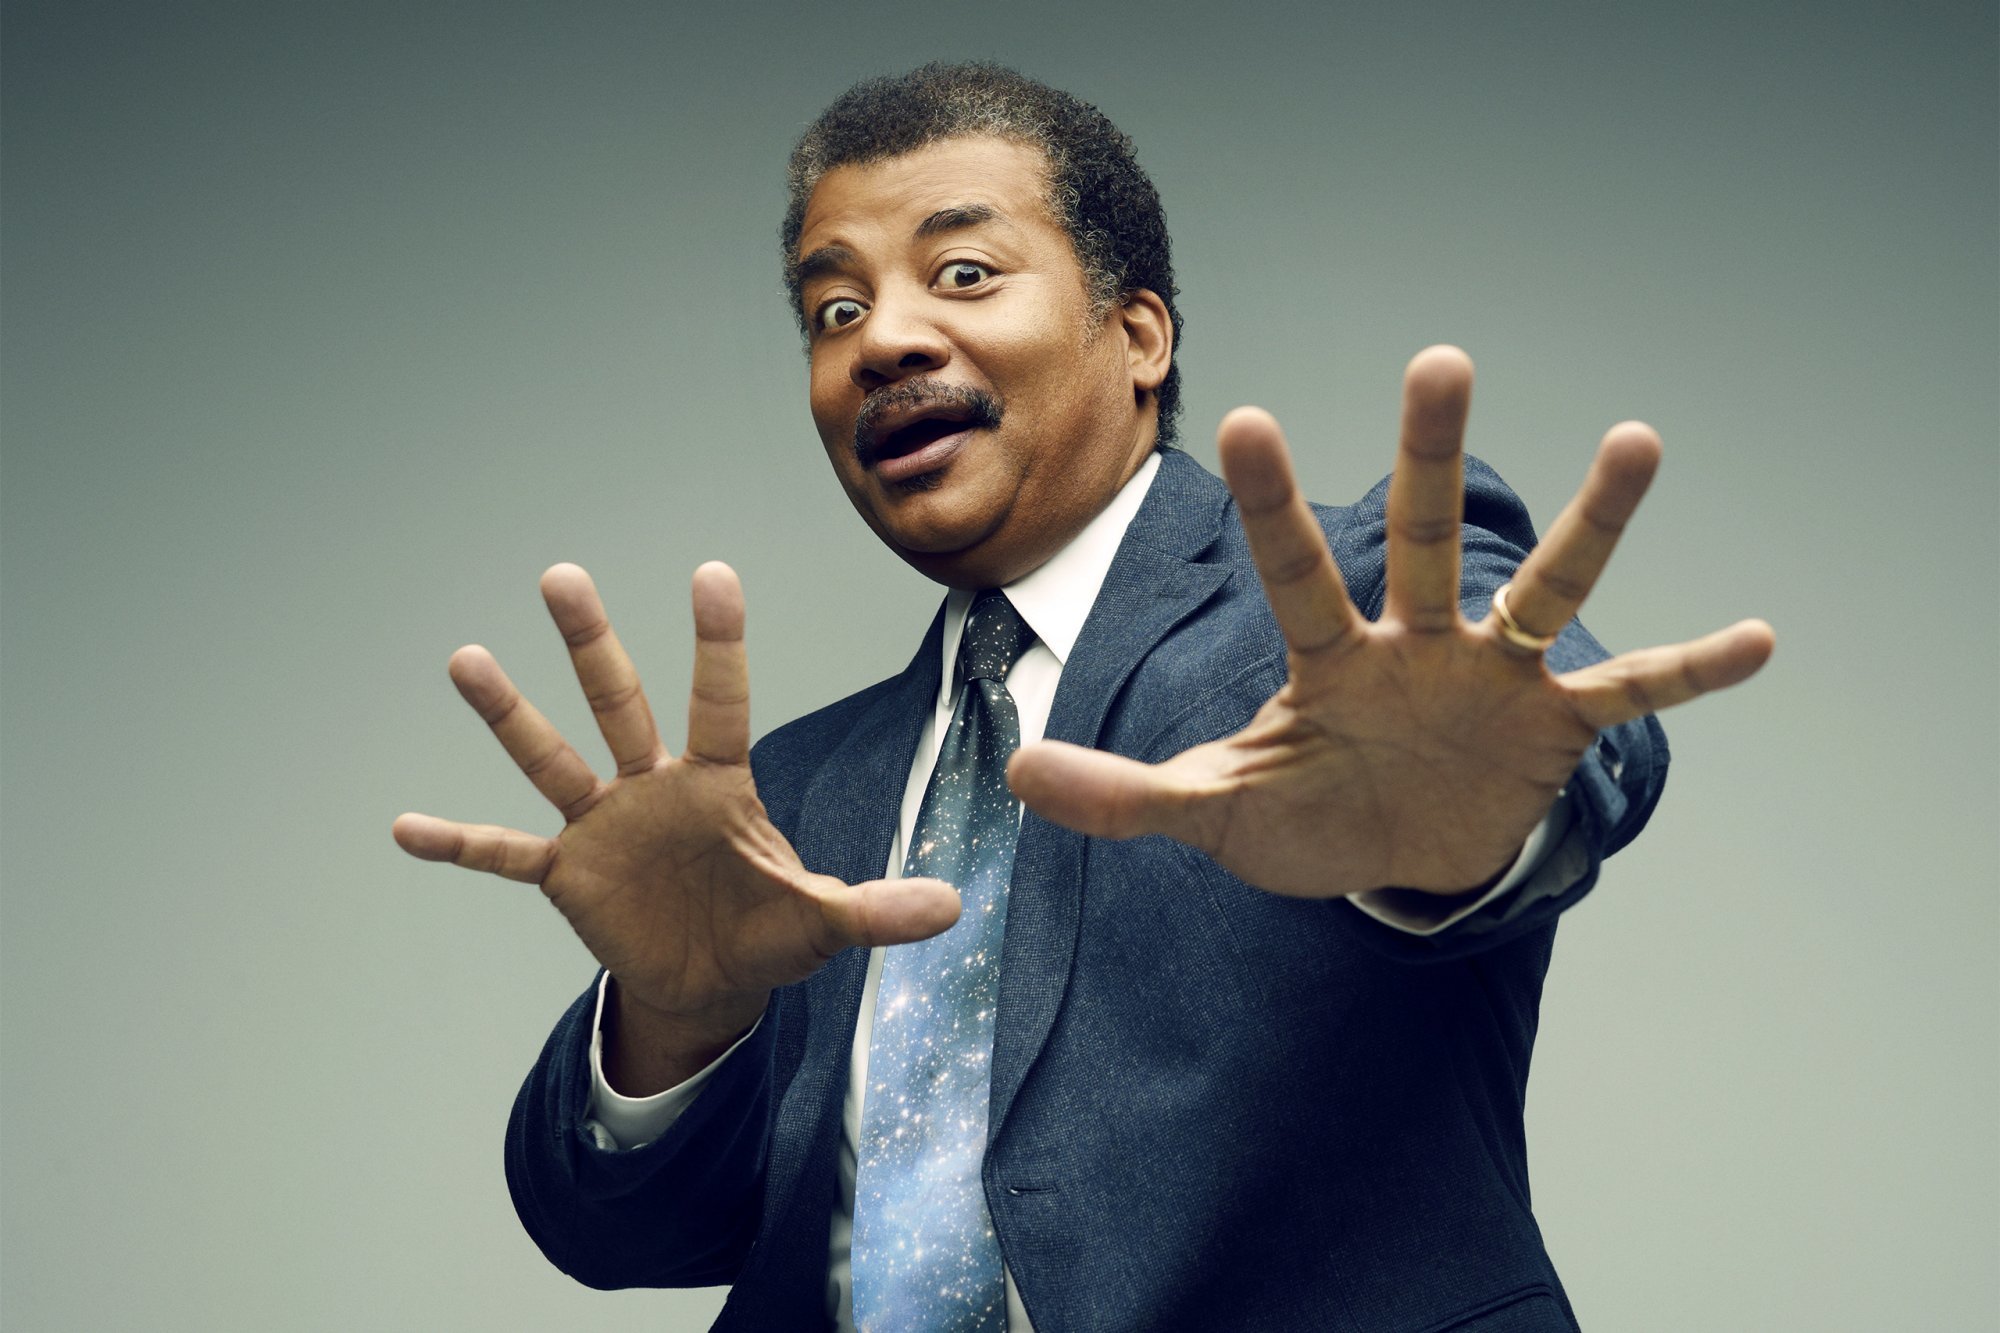 neil-degrasse-tyson-attends-the-cosmos-a-spacetime-odyssey-screening-event-and-panel-at-the-paley.jpeg